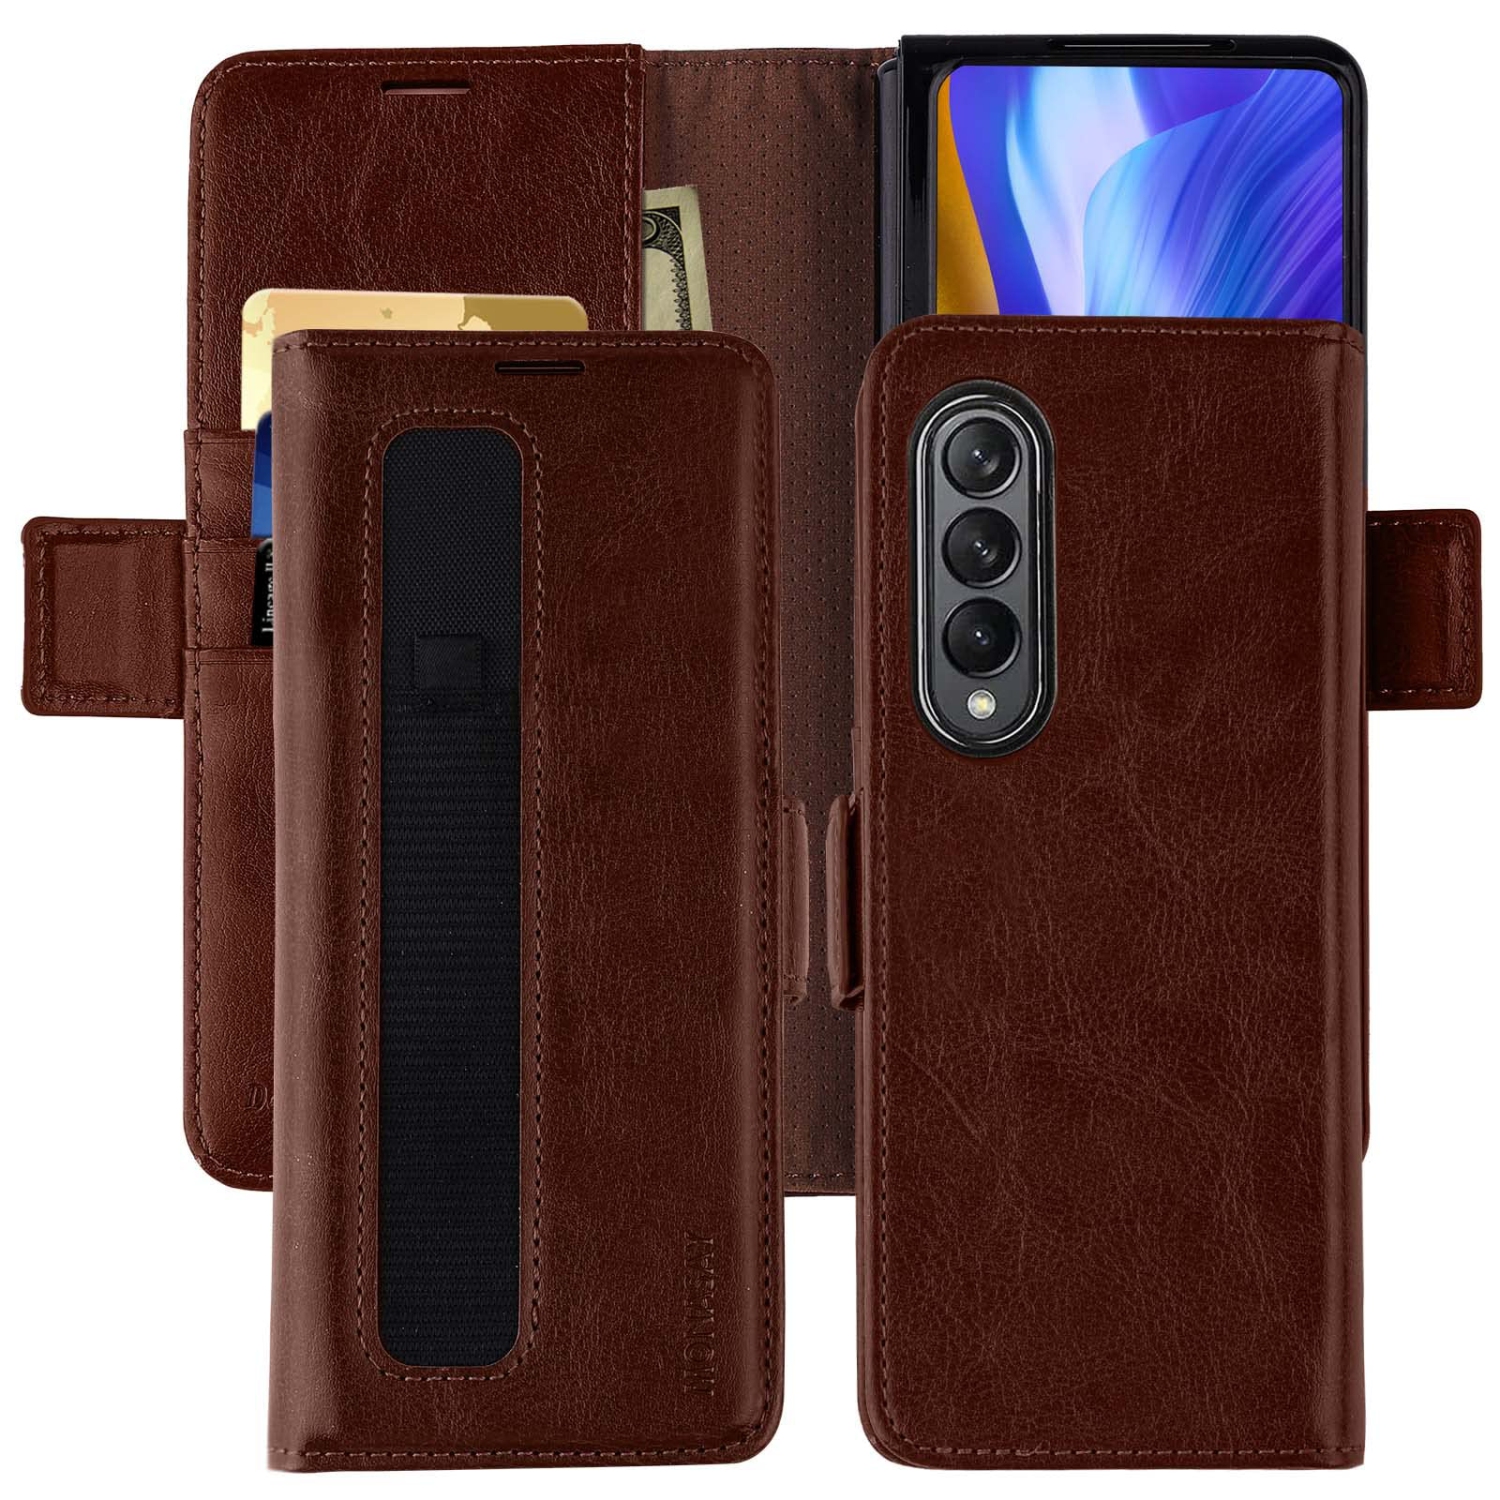 MONASAY Galaxy Z Fold 3 5G Wallet Case with S Pen Holder, Flip Folio Leather Cell Phone Cover with RFID Blocking Credit Card